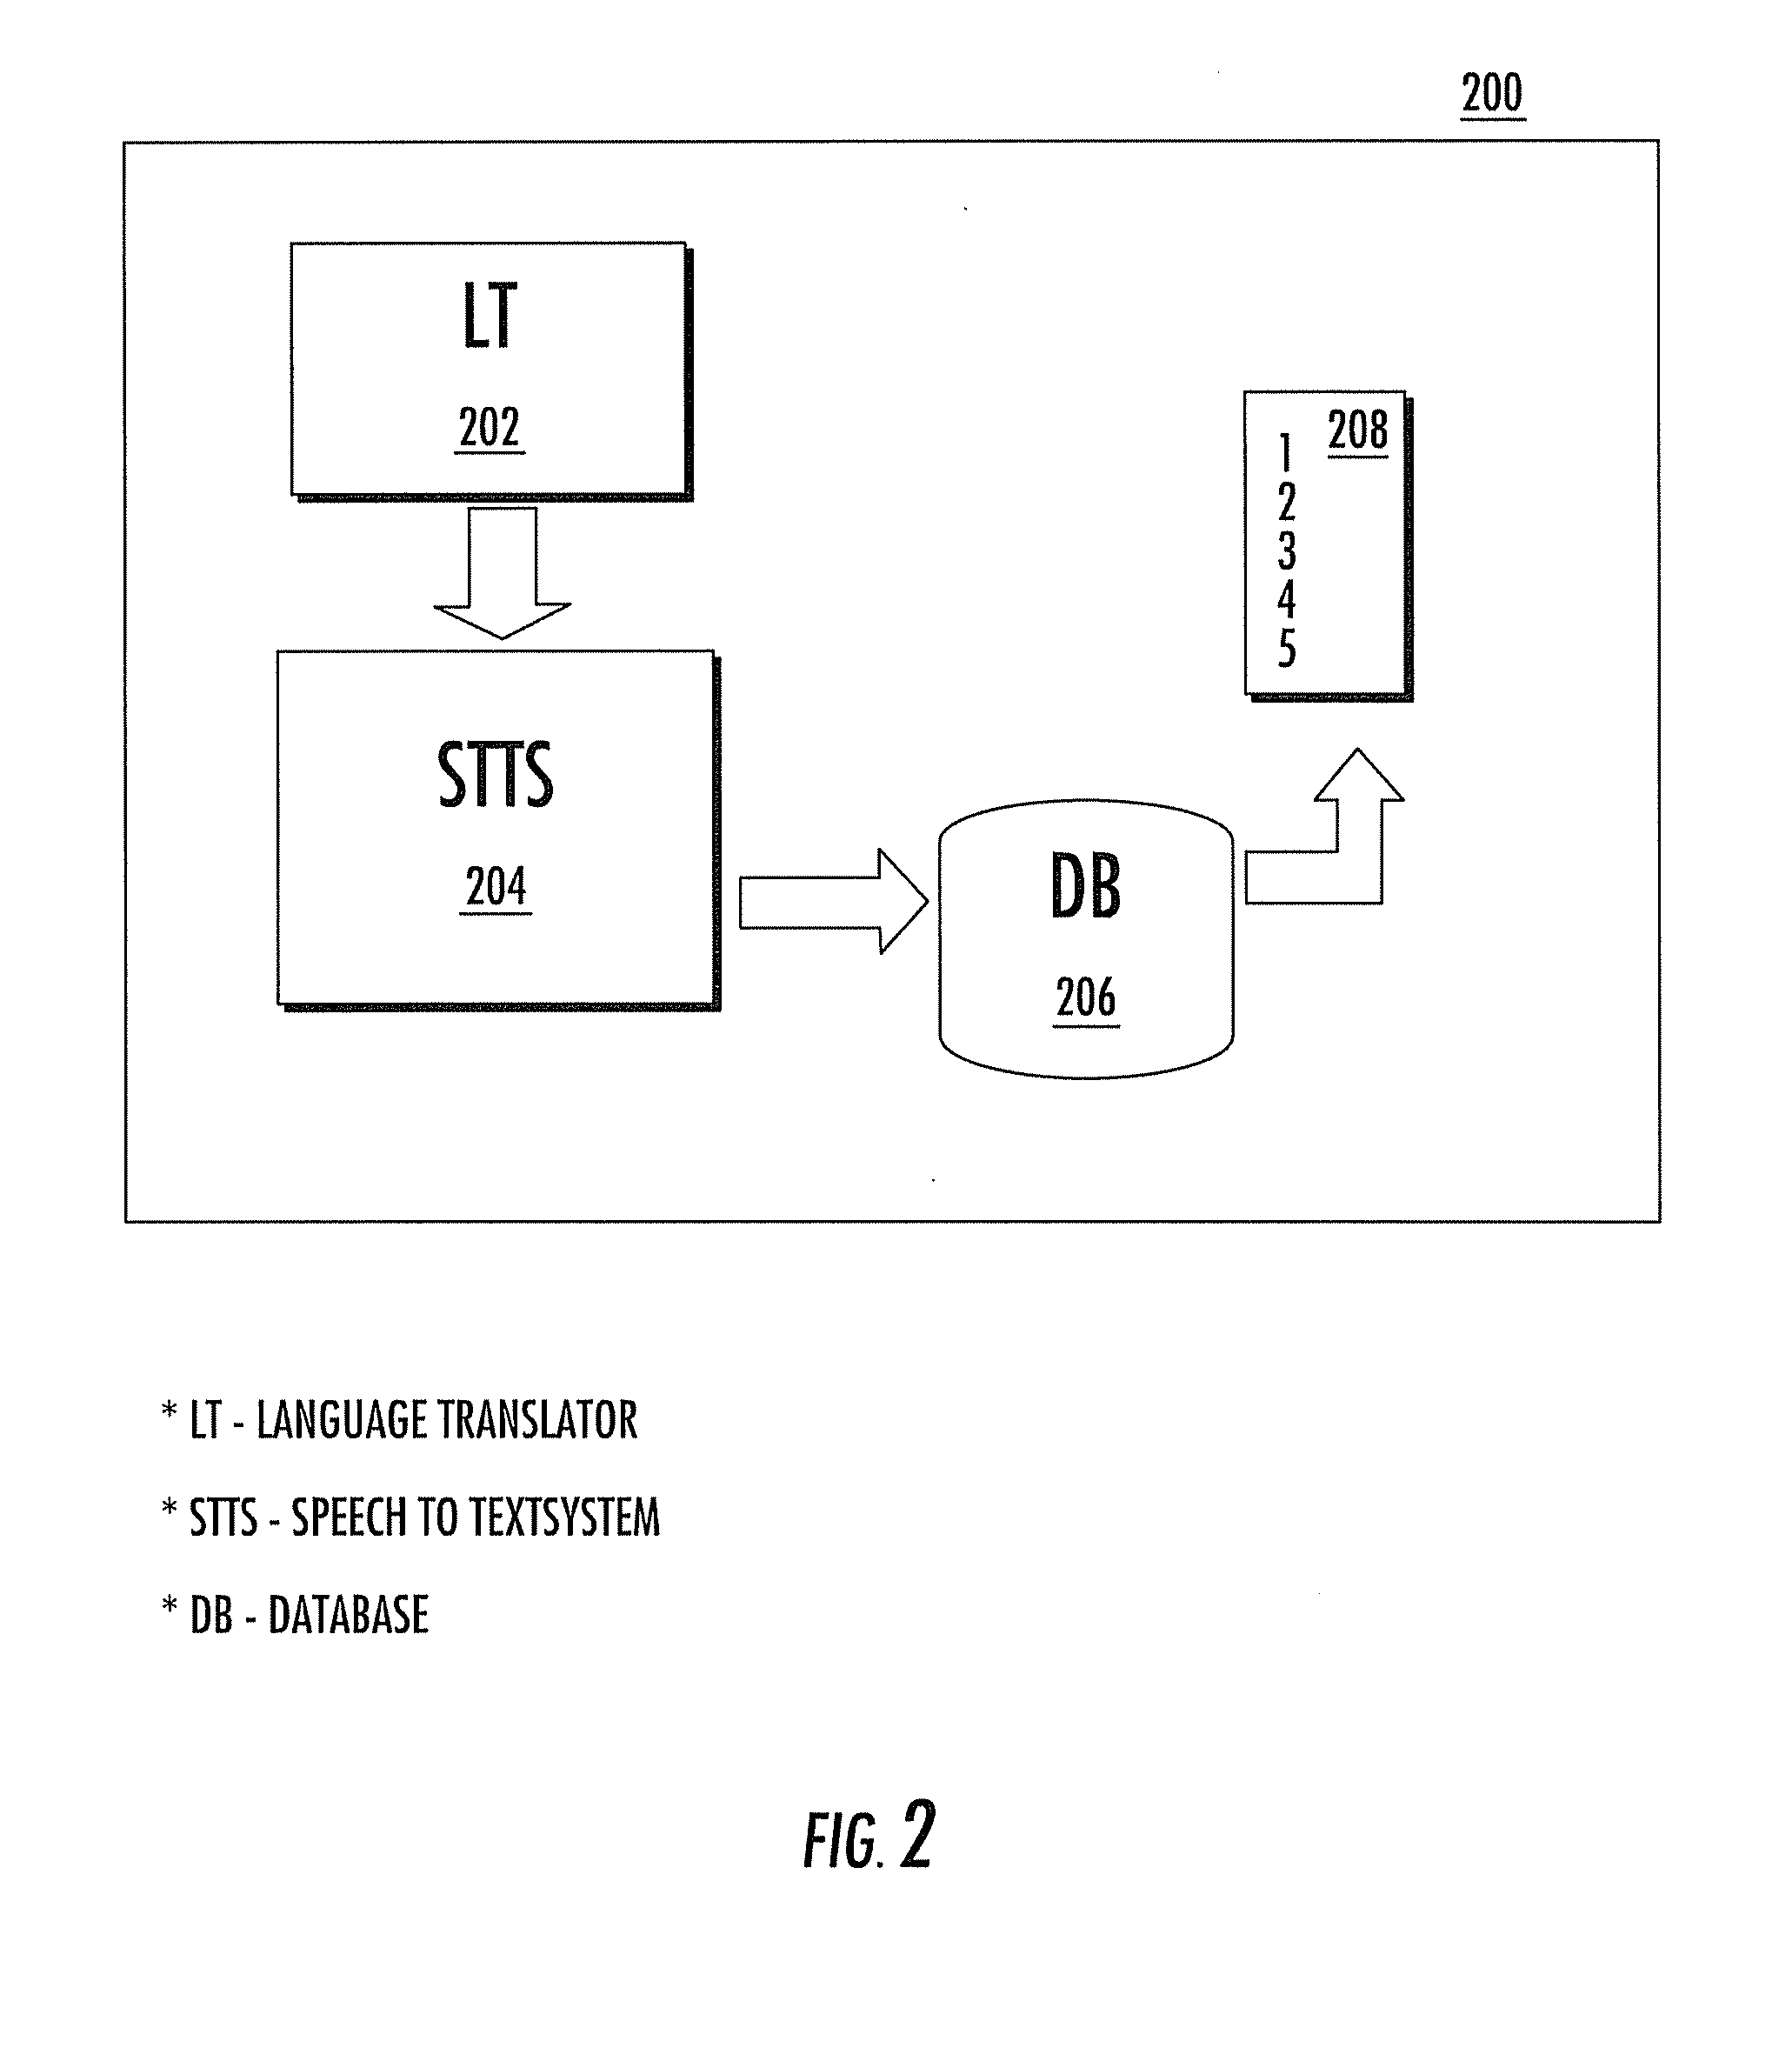 Mass electronic question filtering and enhancement system for audio broadcasts and voice conferences